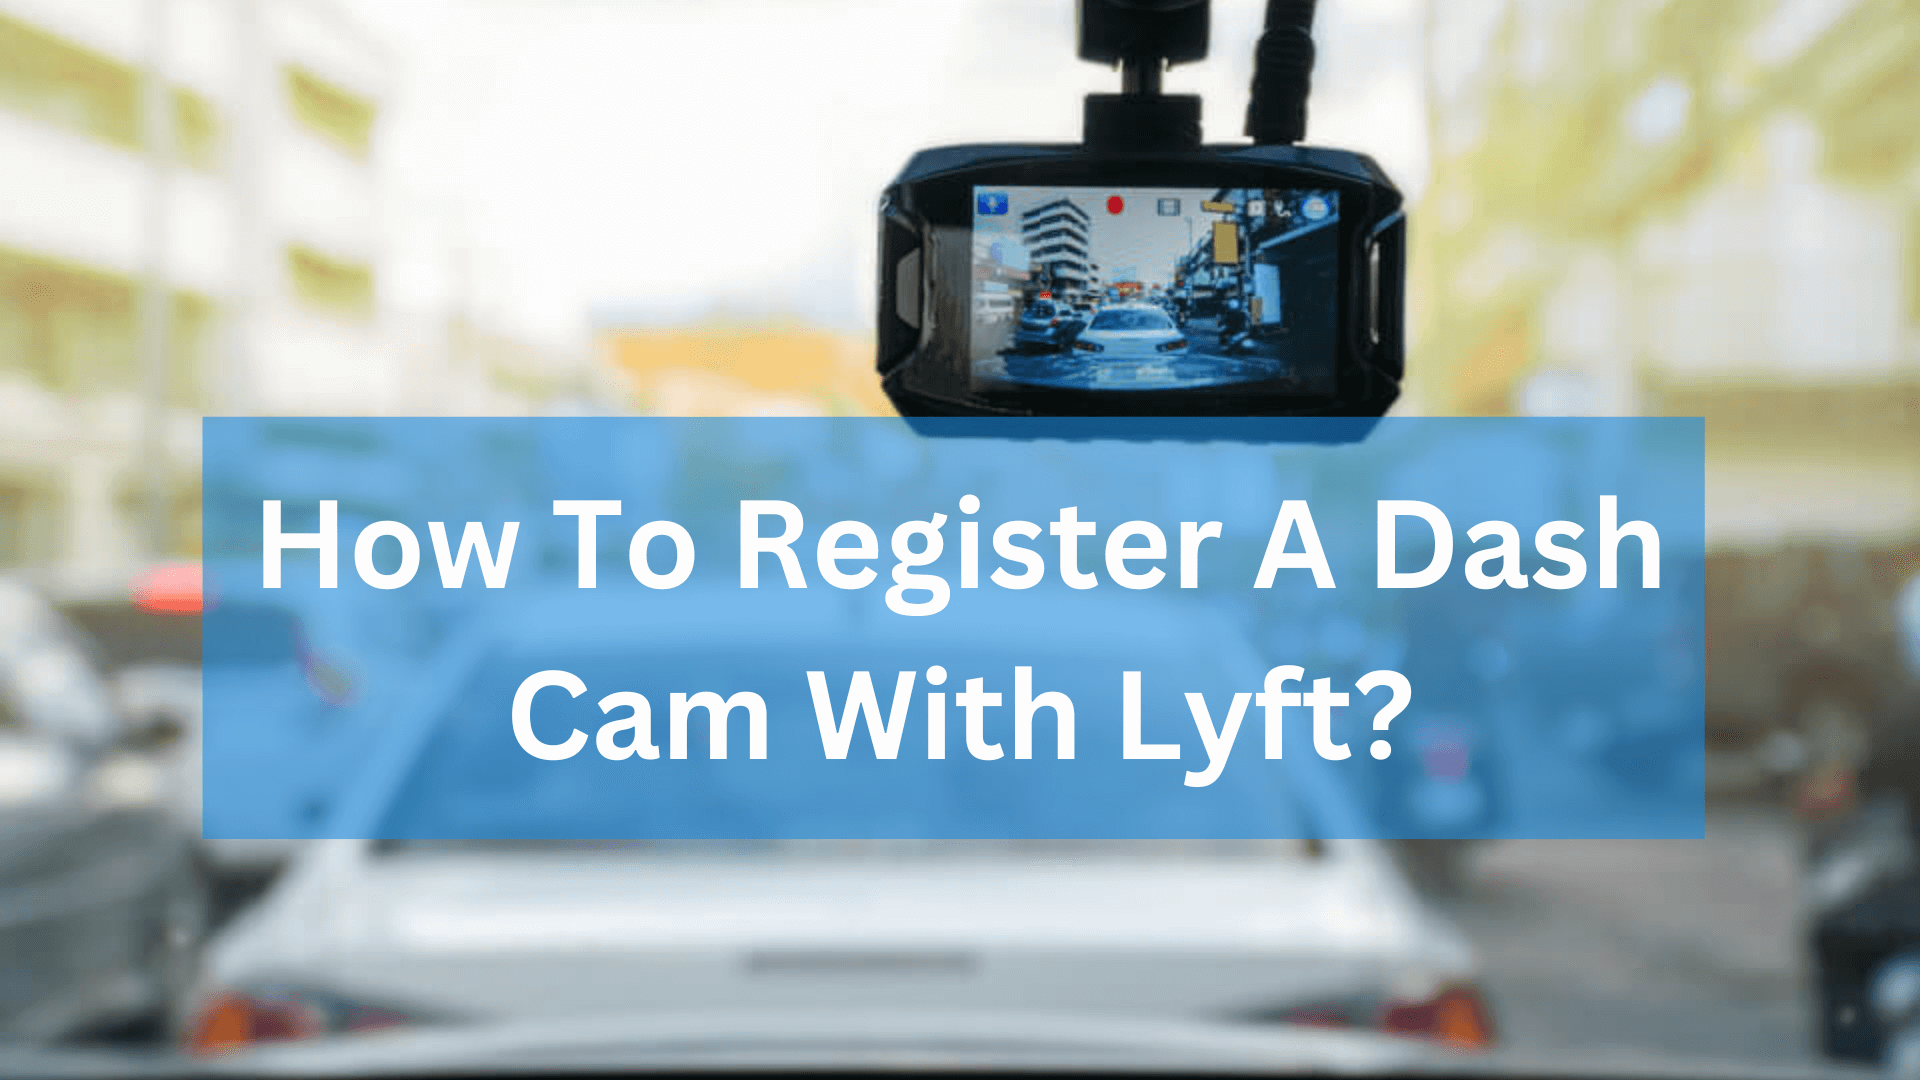 https://dashcamdetails.com/wp-content/uploads/2023/04/How-To-Register-A-Dash-Cam-With-Lyft.png